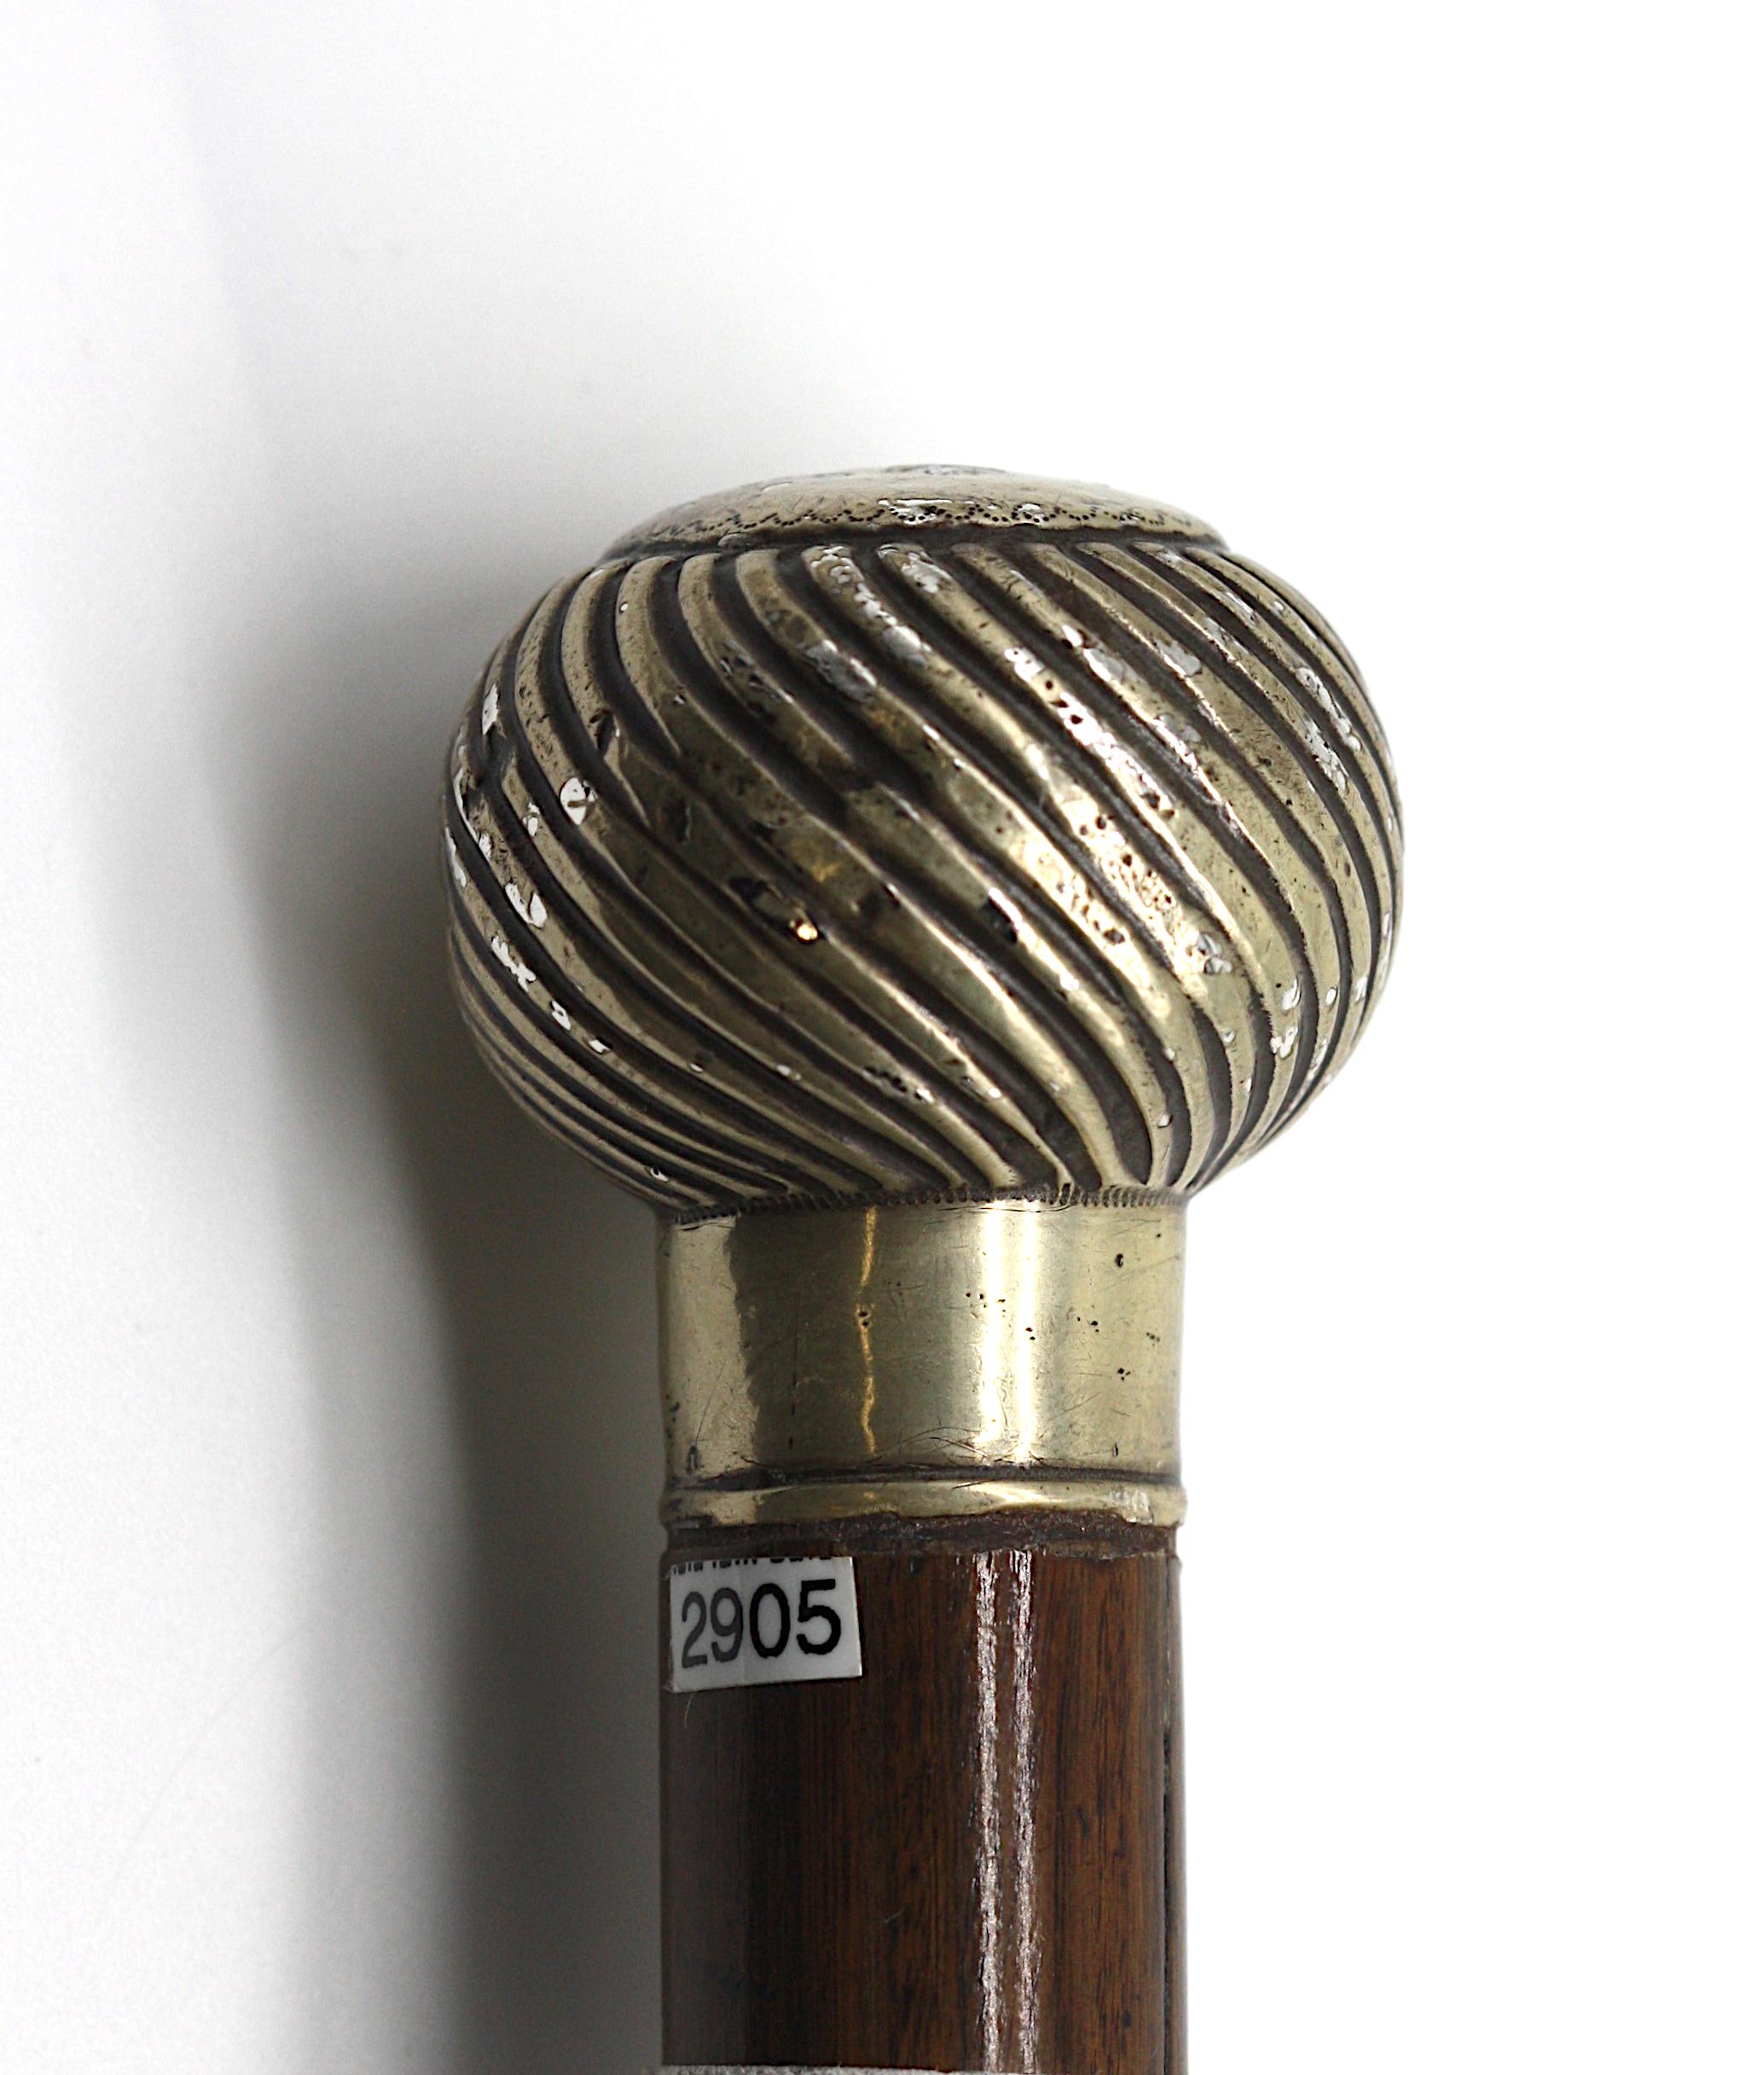 
Silver-Mounted Rosewood Metamorphic Flute Gentlemens Walking Stick. 
Appears unmarked. The spherical pommel chased with spiral reeds, the upper portion a flute with silvered fittings, the rosewood shaft with a metal ferule. 
Length 34.4 in.